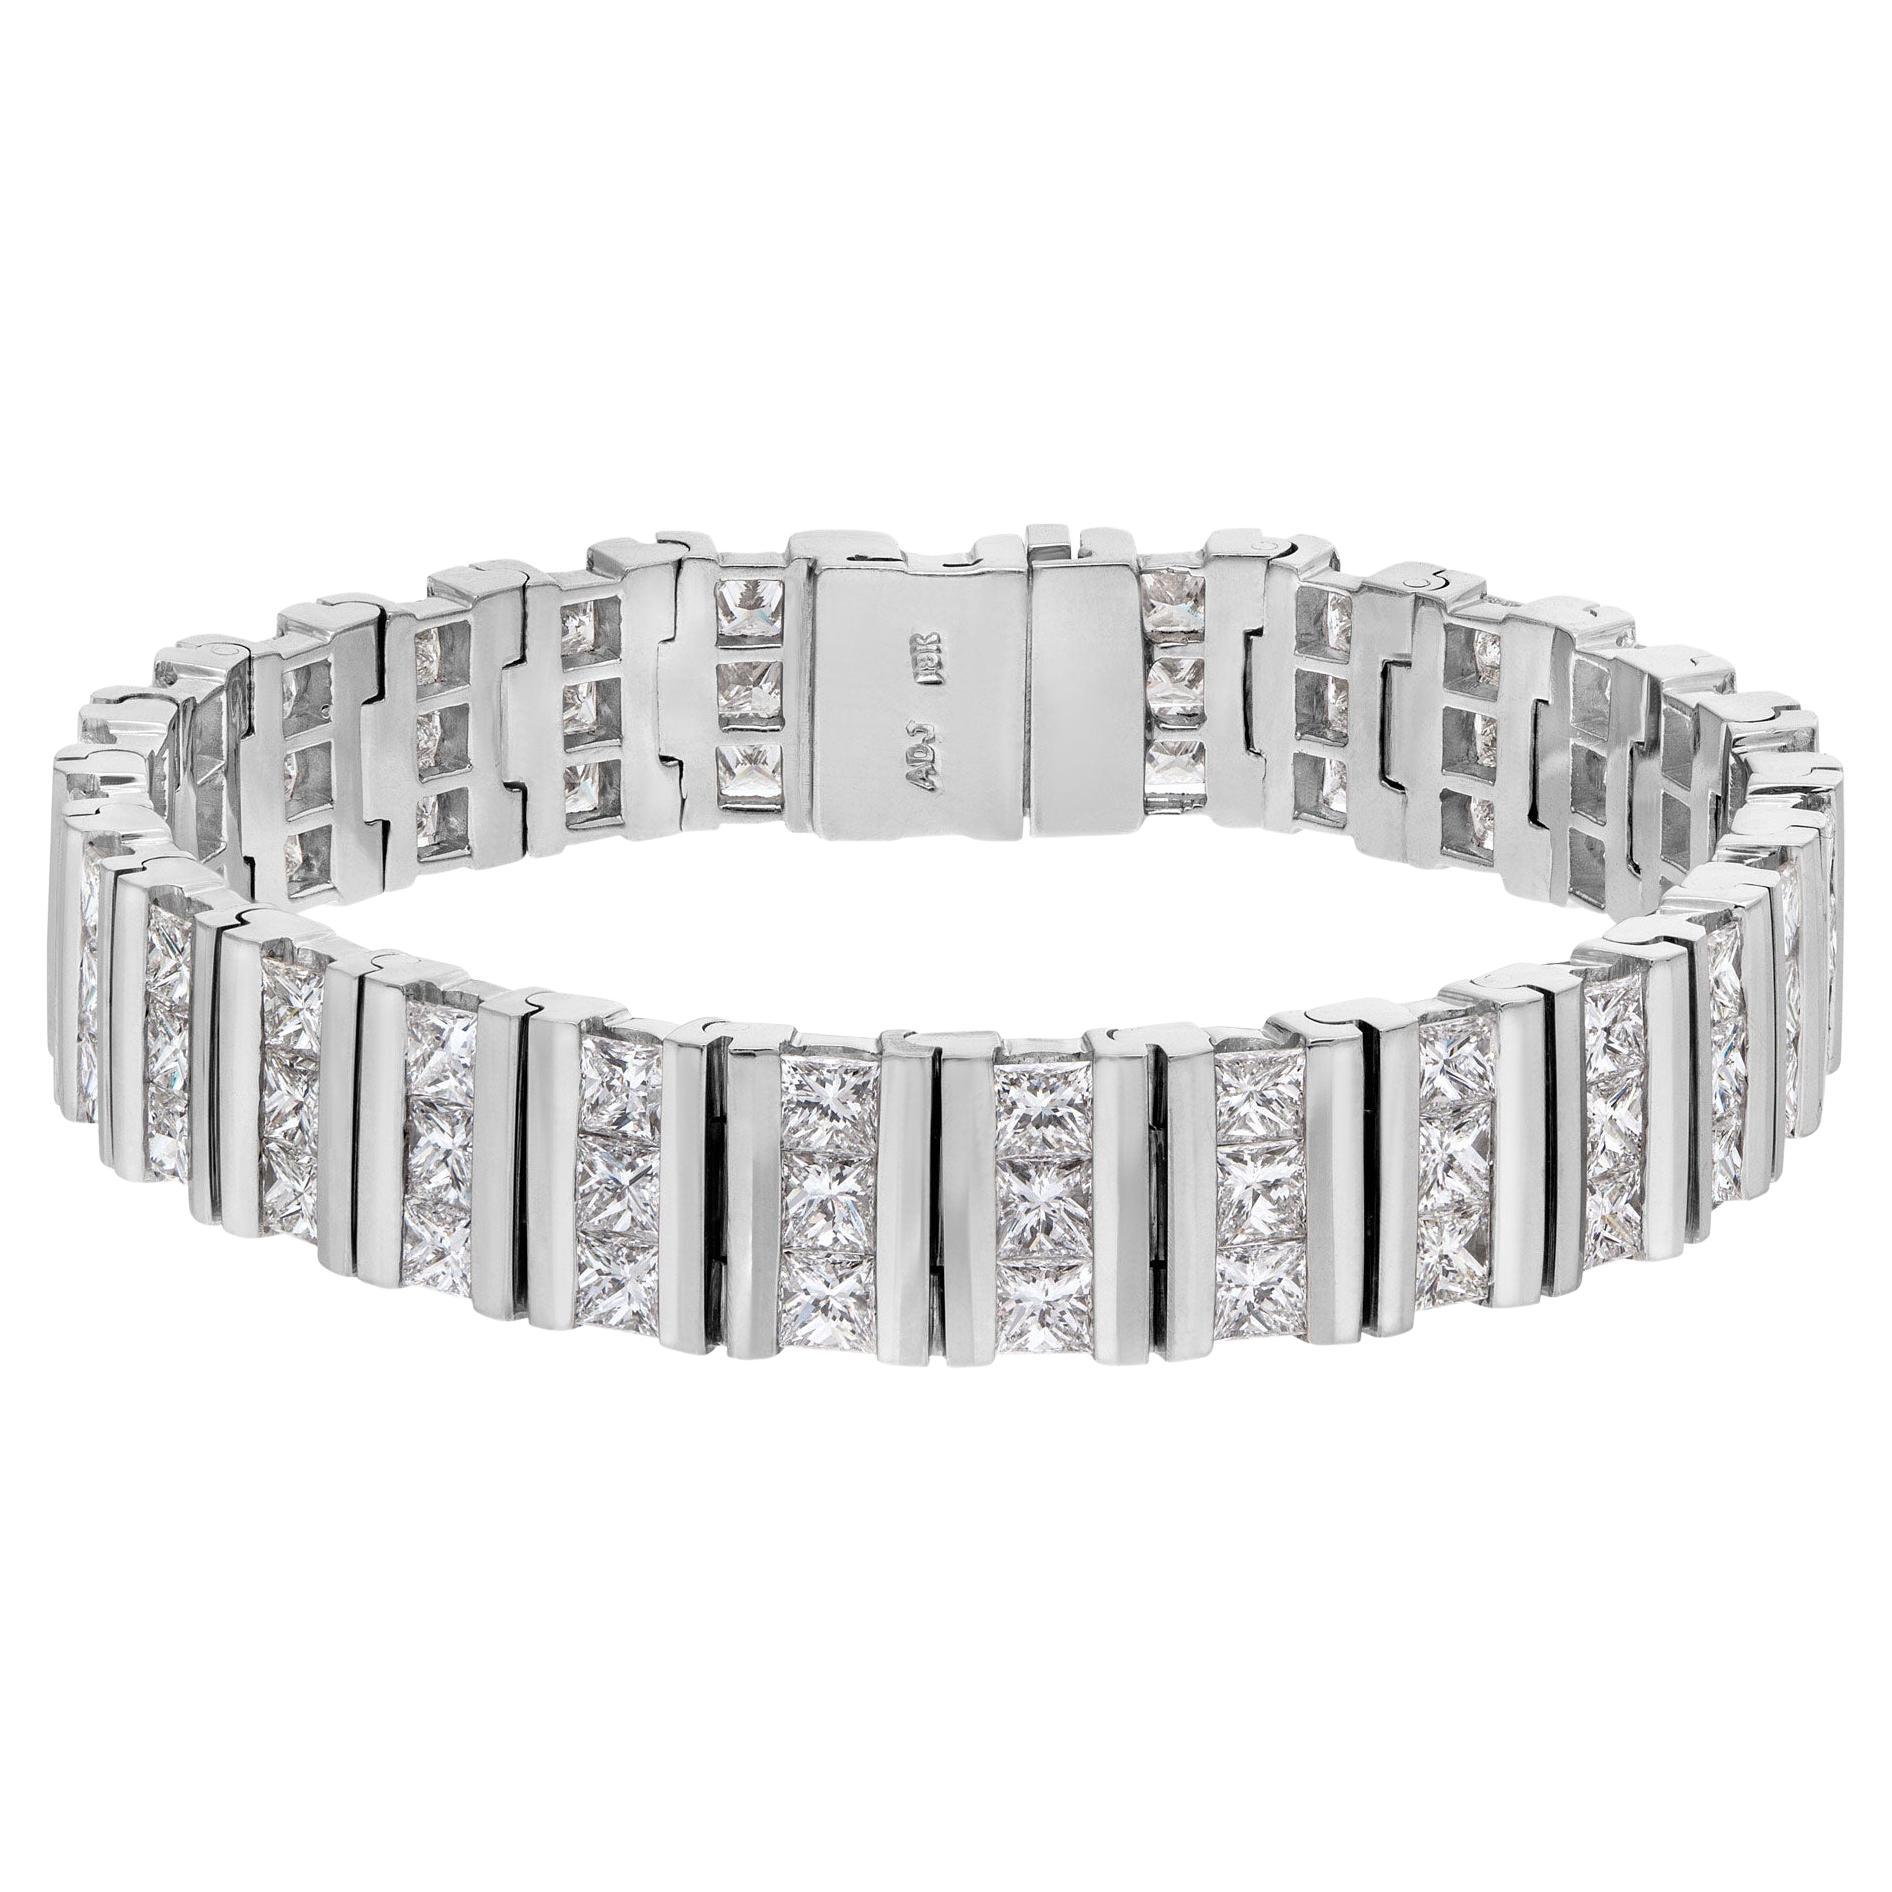 Princess Cut Channel Set Diamond Bracelet in 18k White Gold with over 16.20